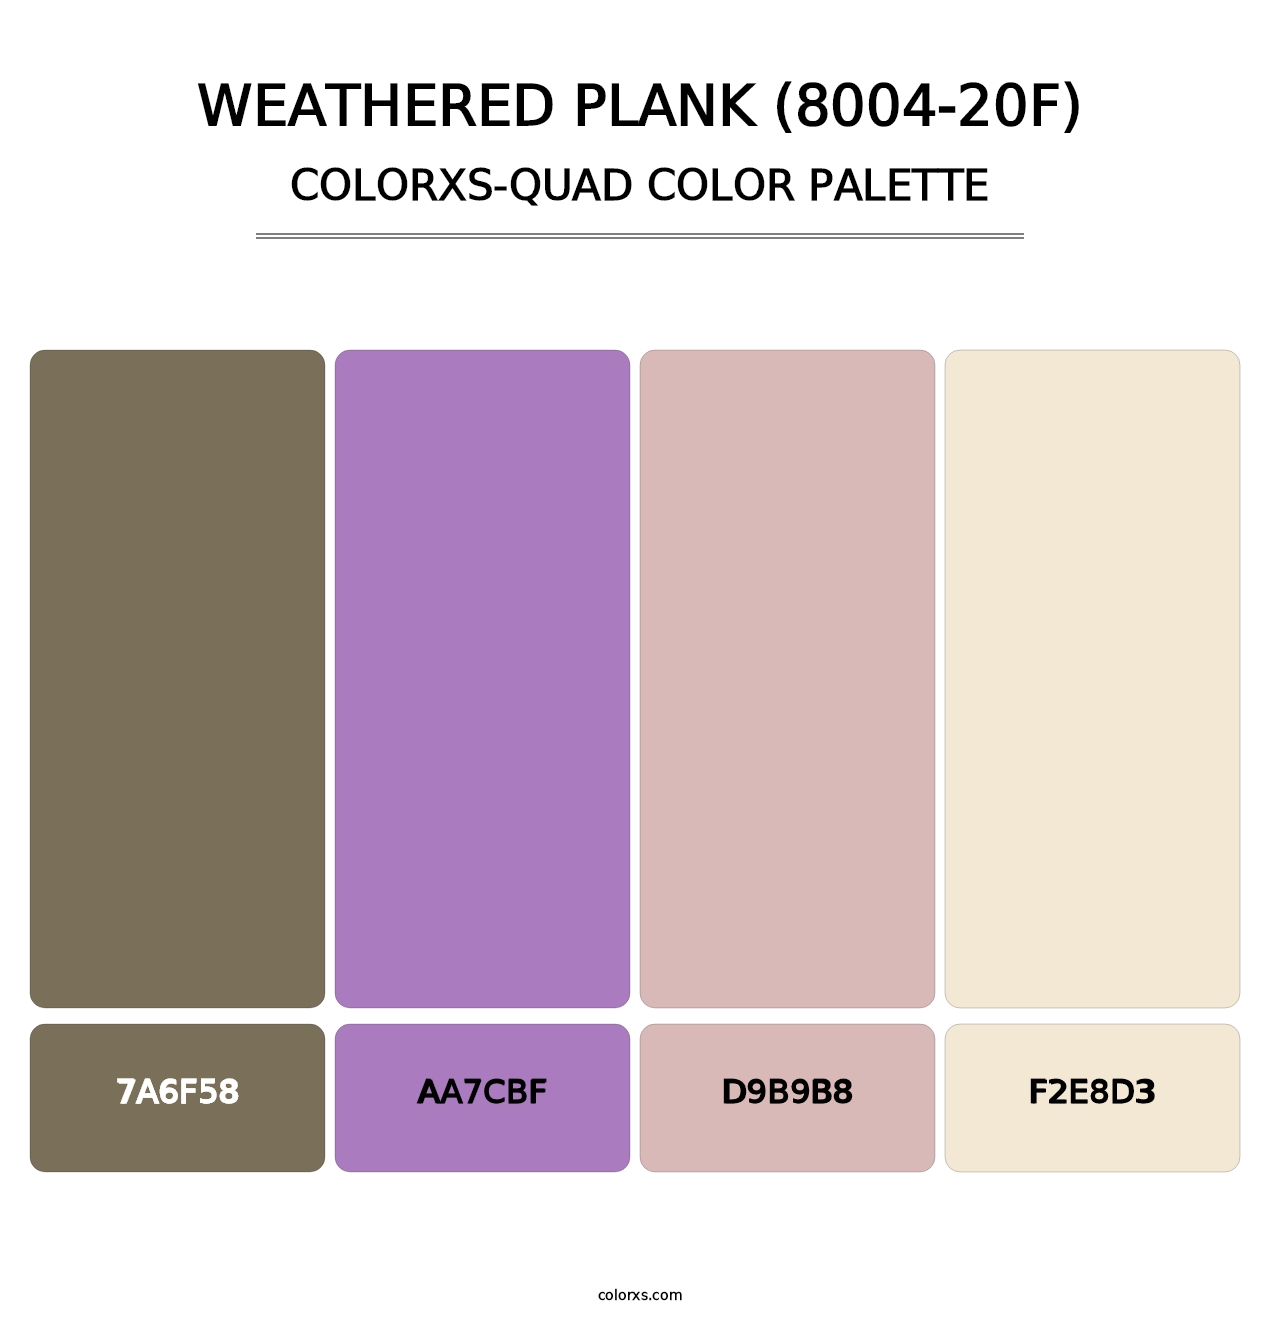 Weathered Plank (8004-20F) - Colorxs Quad Palette